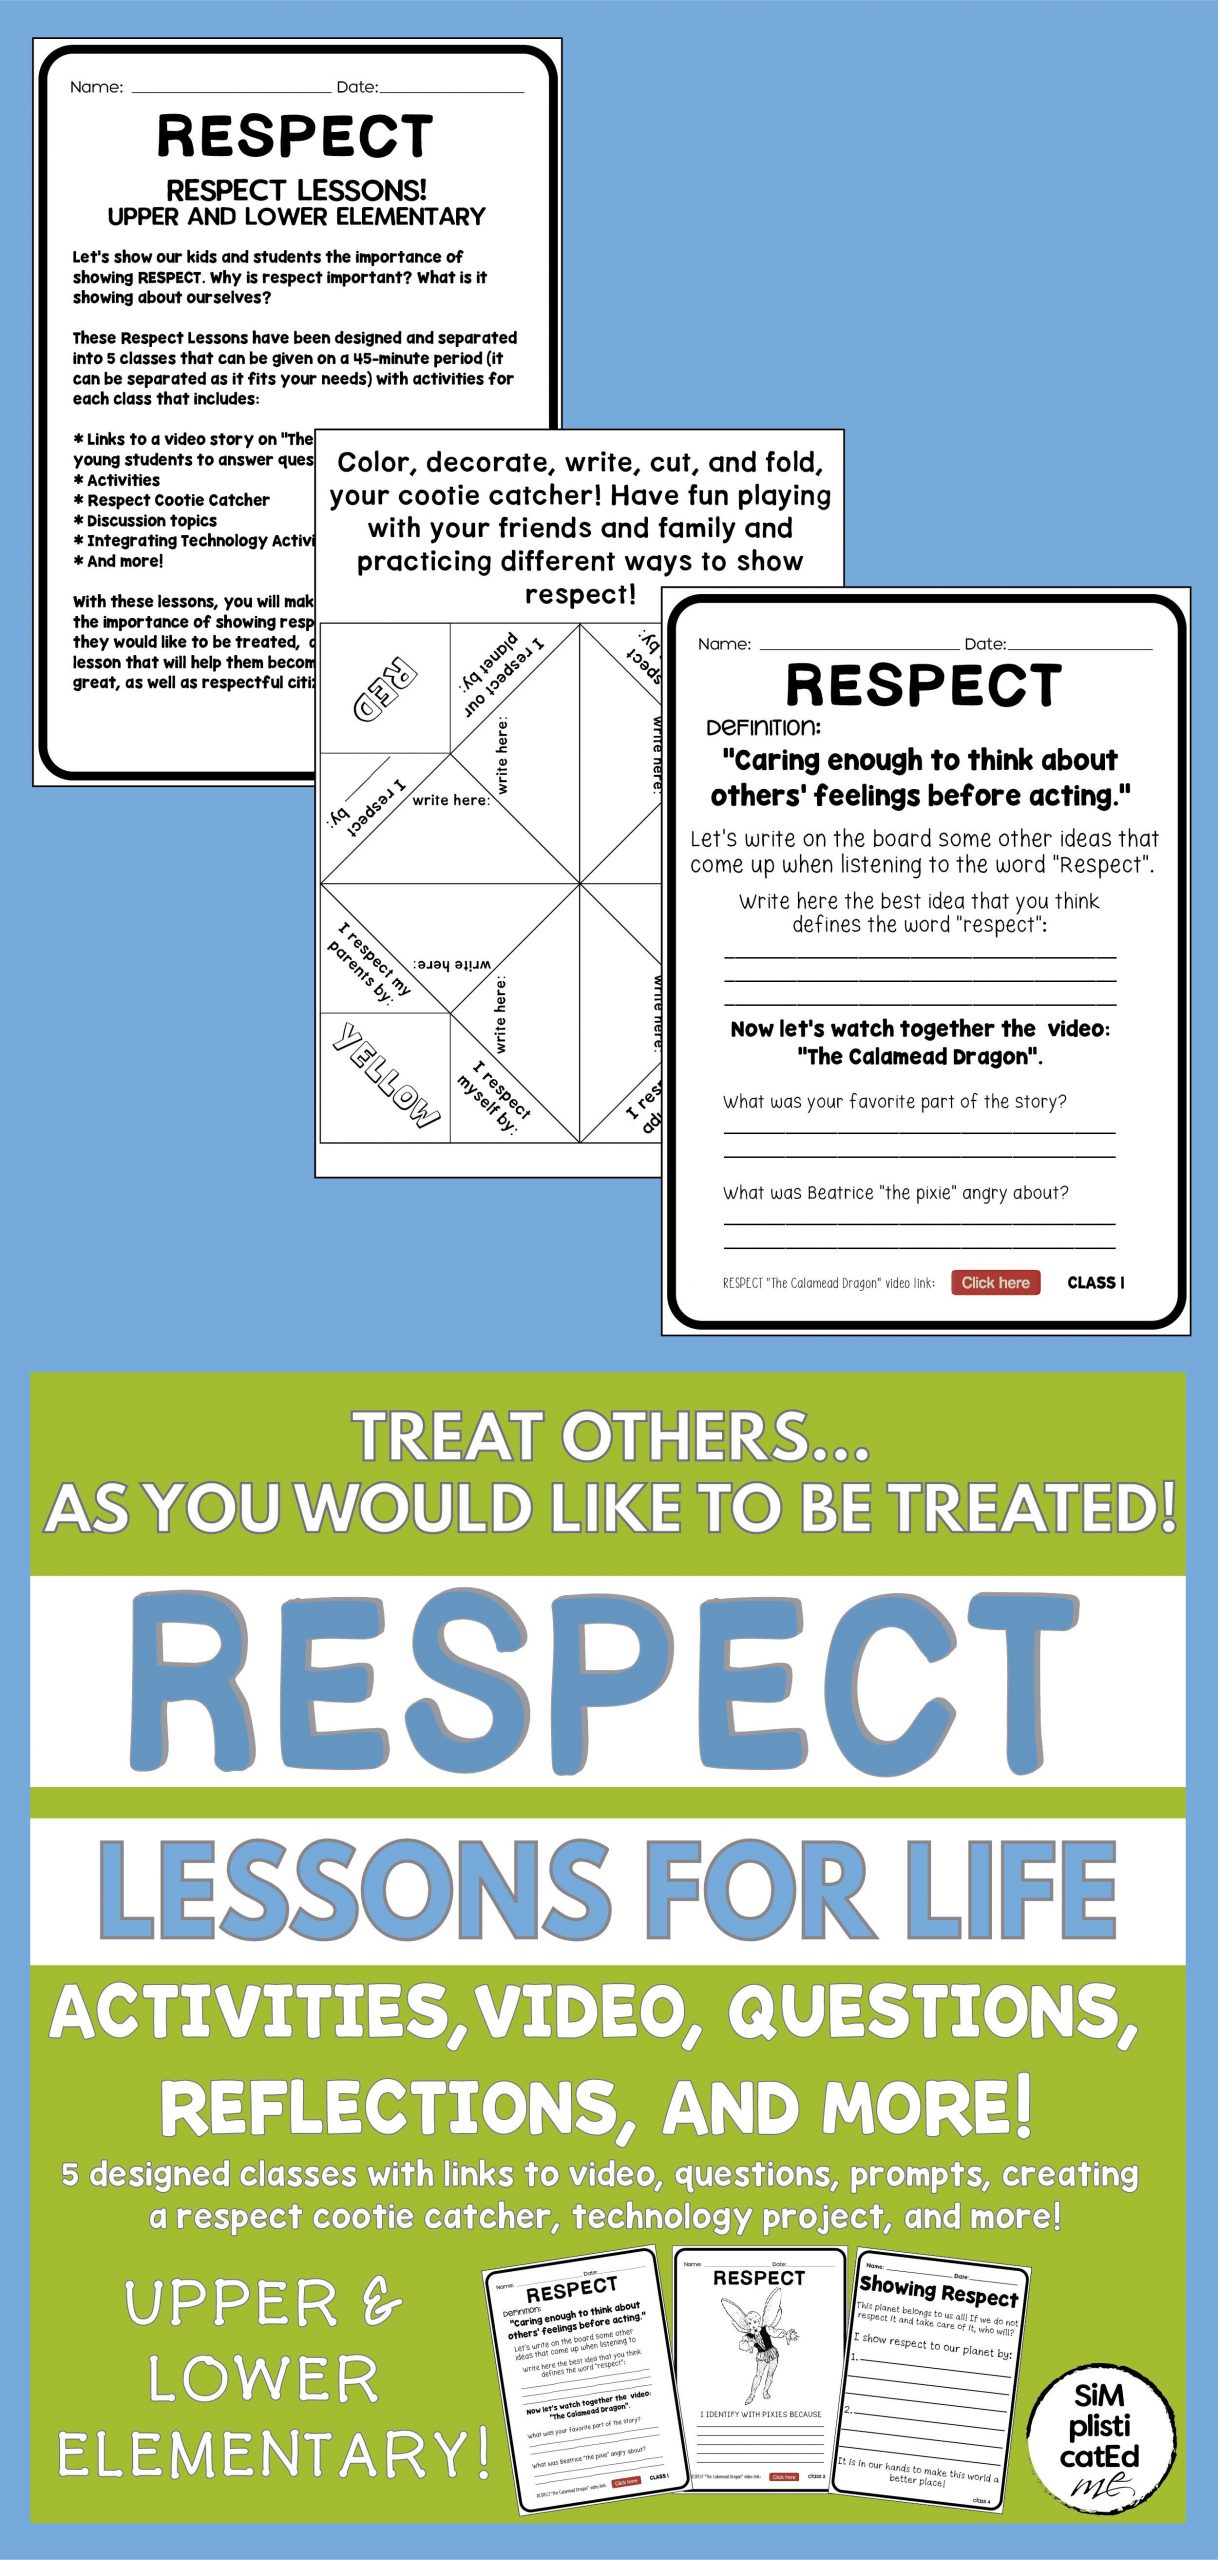 Respect Lesson Plans Respect Lessons for Life Activities Video Reflections